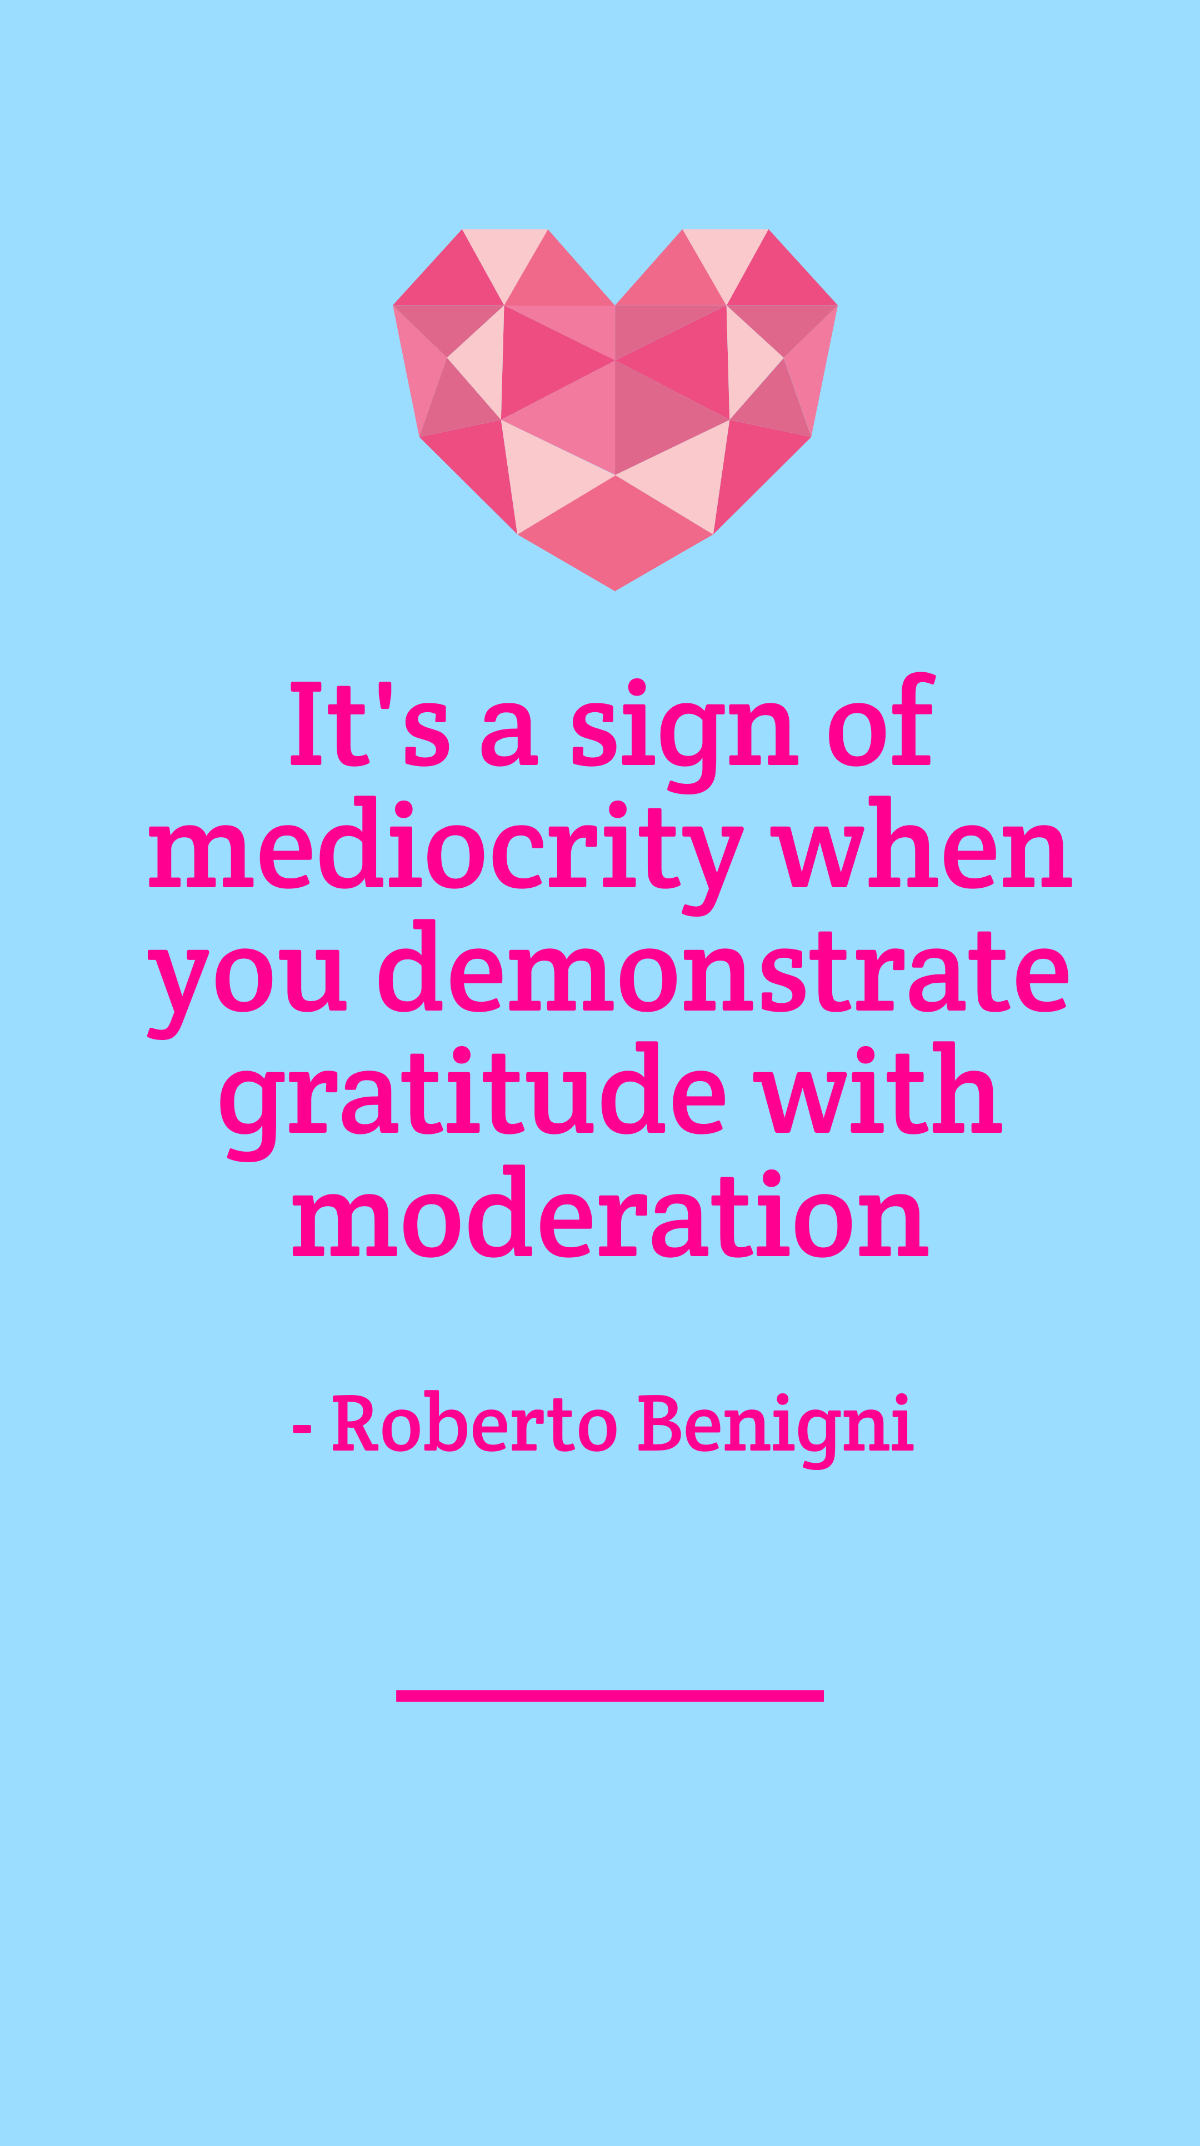 Roberto Benigni - It's a sign of mediocrity when you demonstrate gratitude with moderation